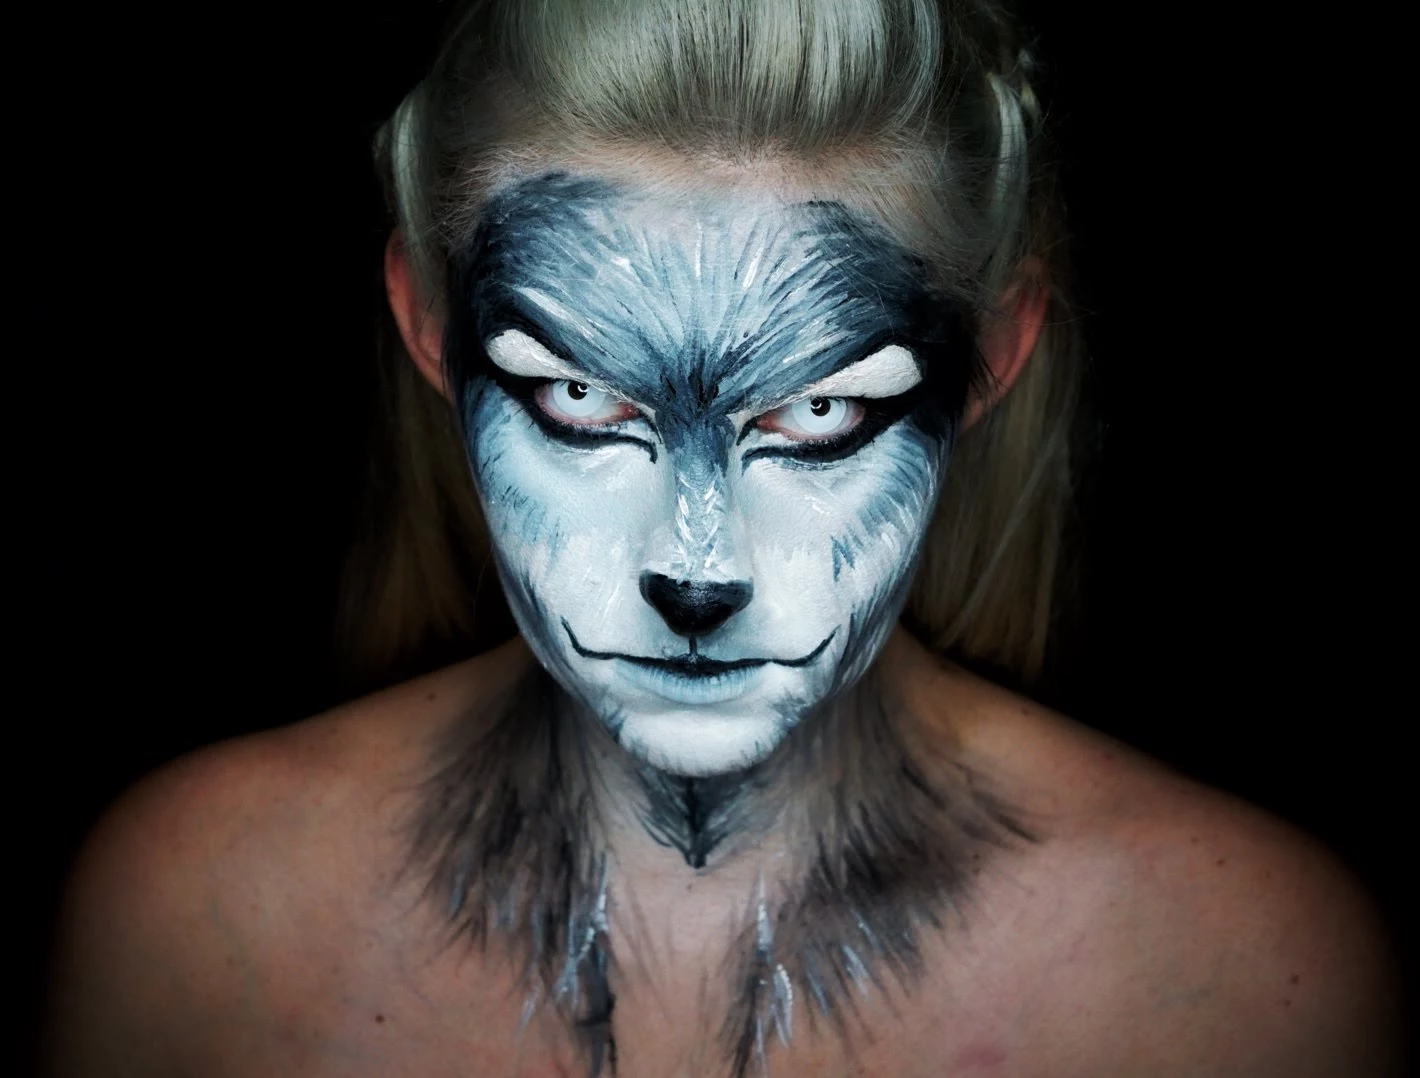 werewolf face paint, in white and grey, worn with pale blue contact lenses, by a blonde woman, halloween face paint 